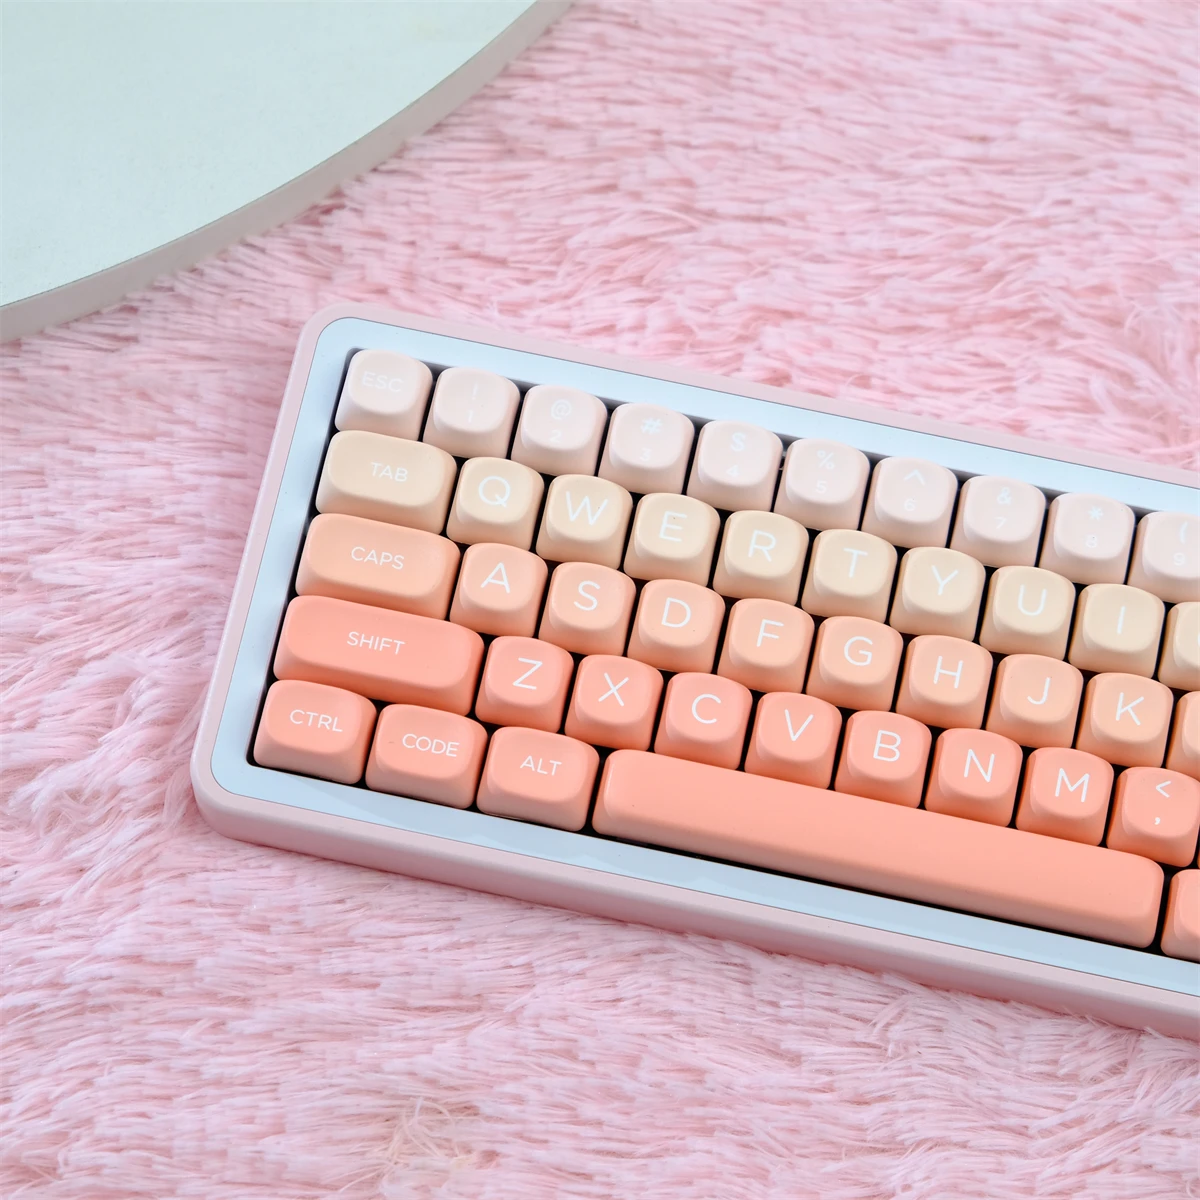 

126 Keys Rouge Pink Gradient Color Keycaps Dye Sublimation MOA Profile PBT Keycaps For MX Switches Mechanical Keyboard Key Caps